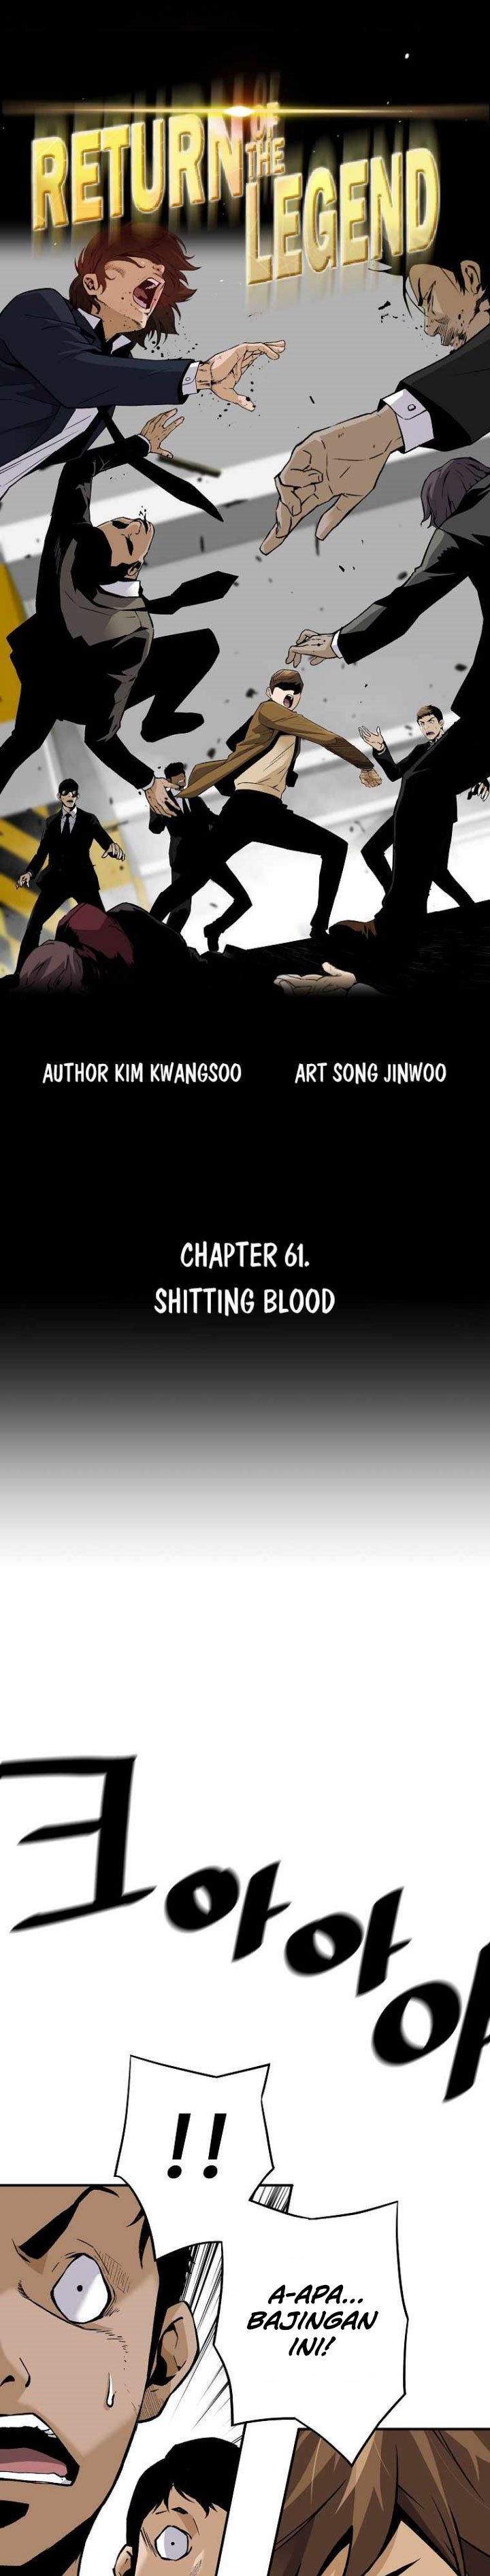 Return Of The Legend Chapter 61 - 201